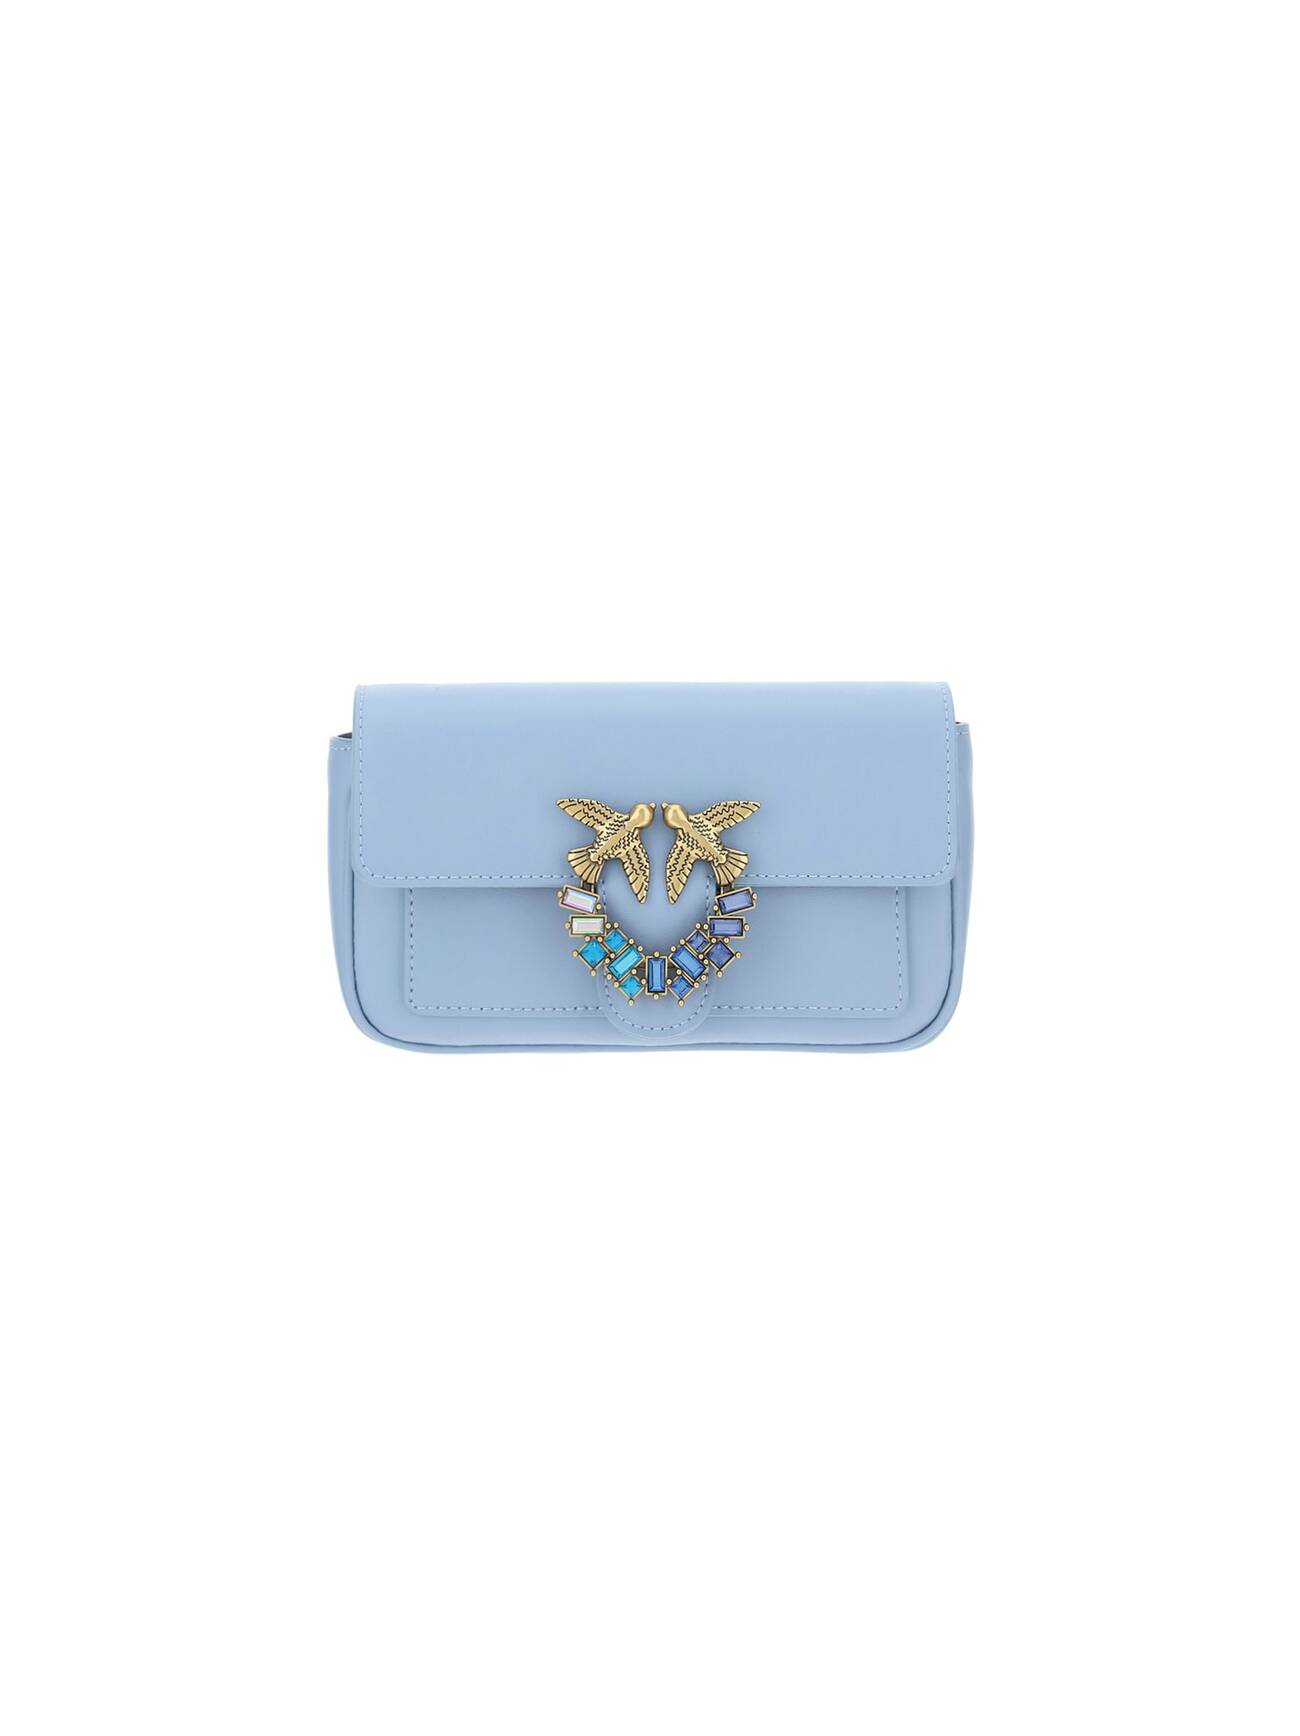 Pinko Love Pocket Simply Bag in blue / gold